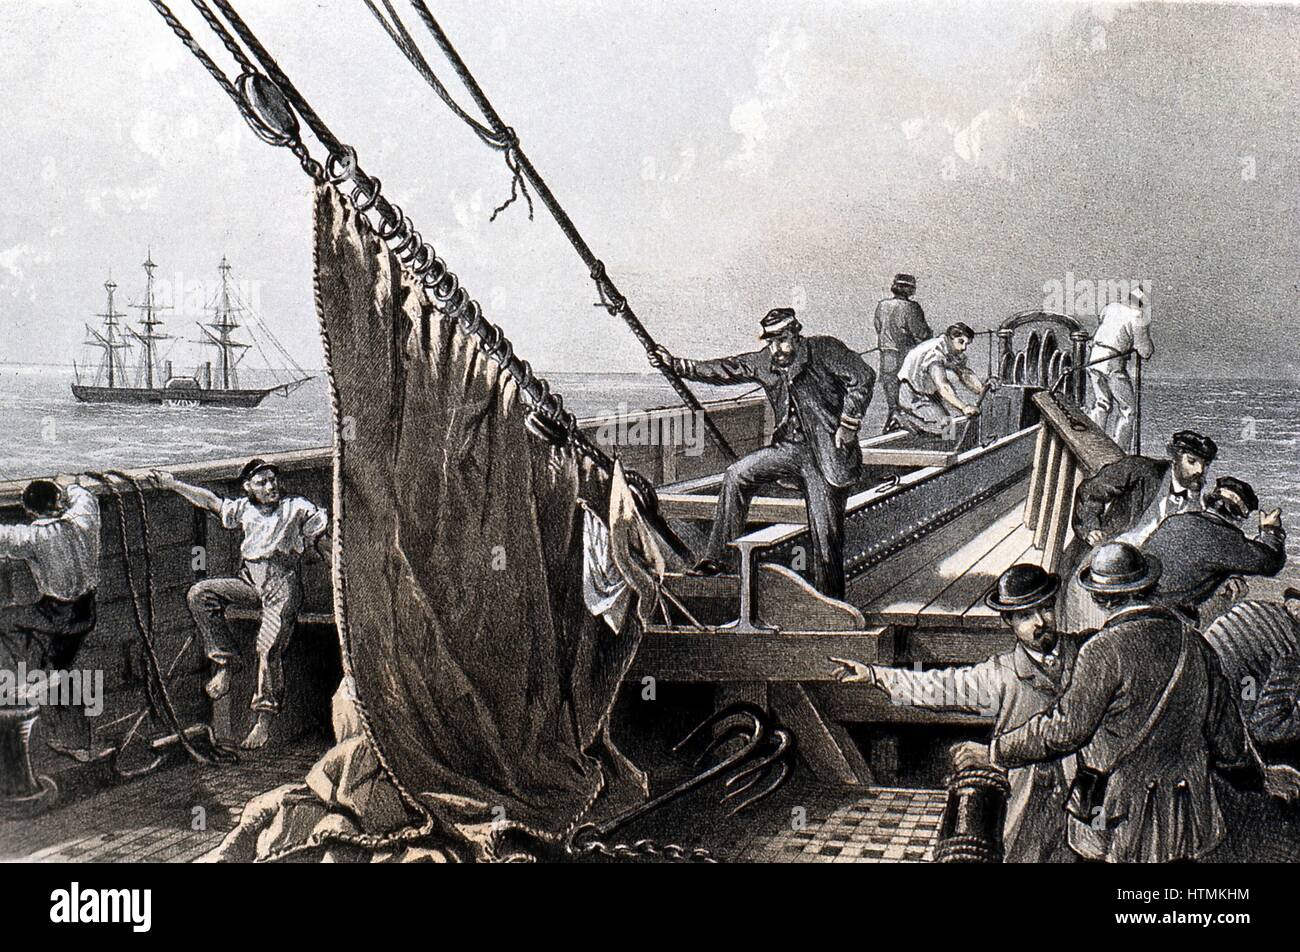 The Atlantic Telegraph: preparing to grapple for the broken cable from the bows of the SS 'Great Eastern' 2 August 1865. From WH Russell 'The Atlantic Telegraph' London 1866. Tinted lithograph Stock Photo